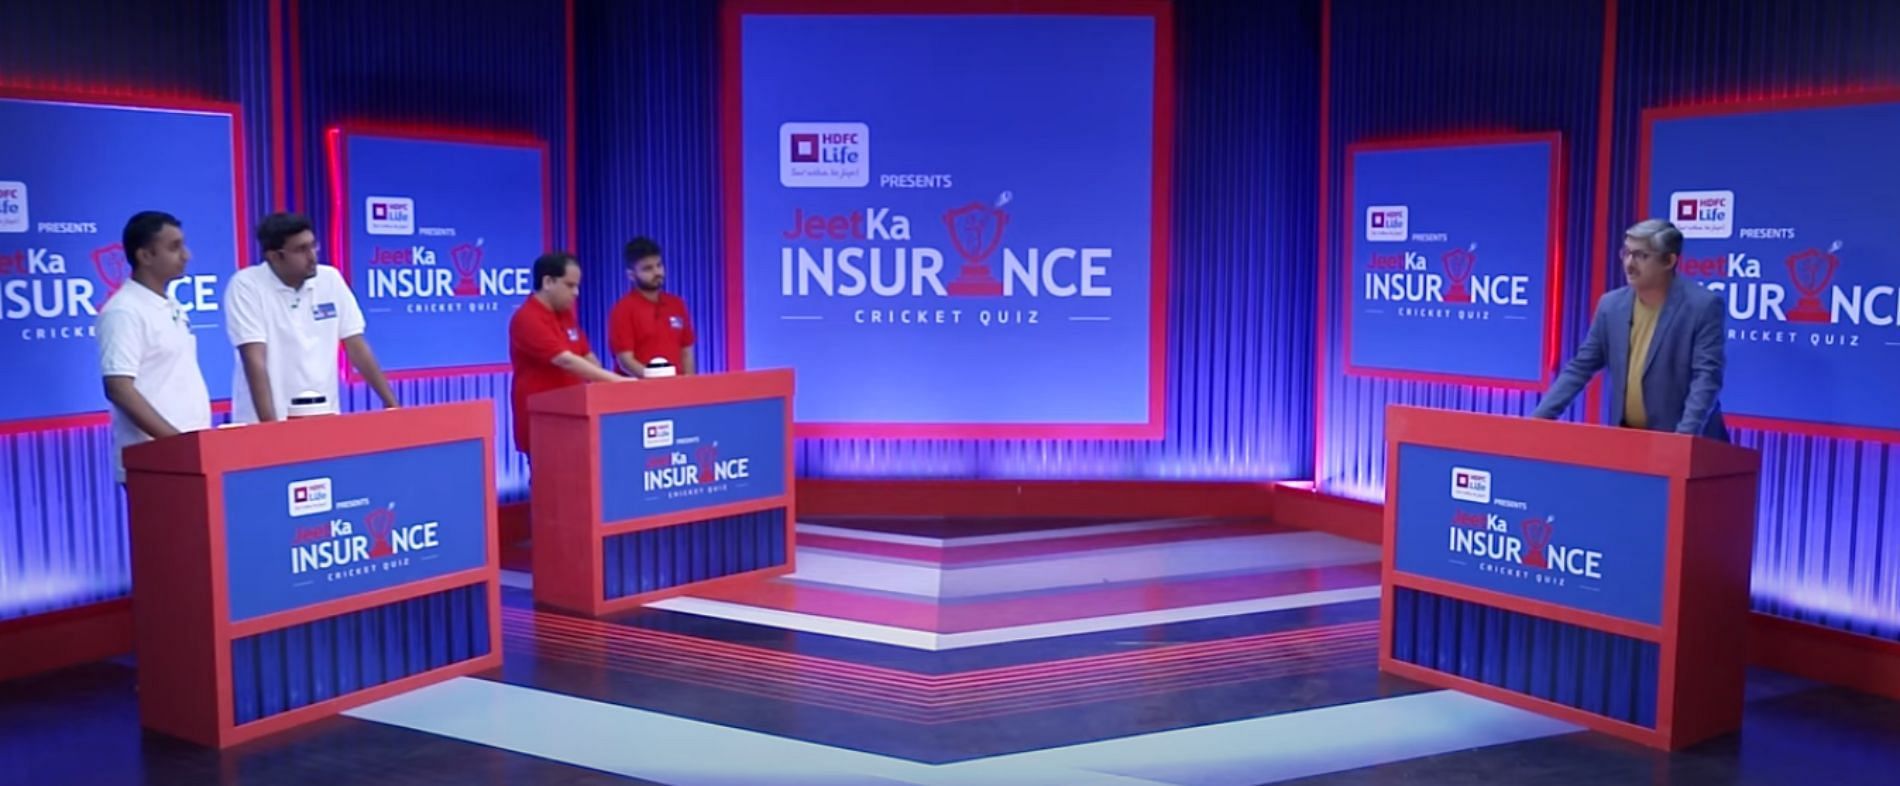 HDFC Life presents Jeet Ka Insurance Cricket Quiz: The action-packed Super 8s